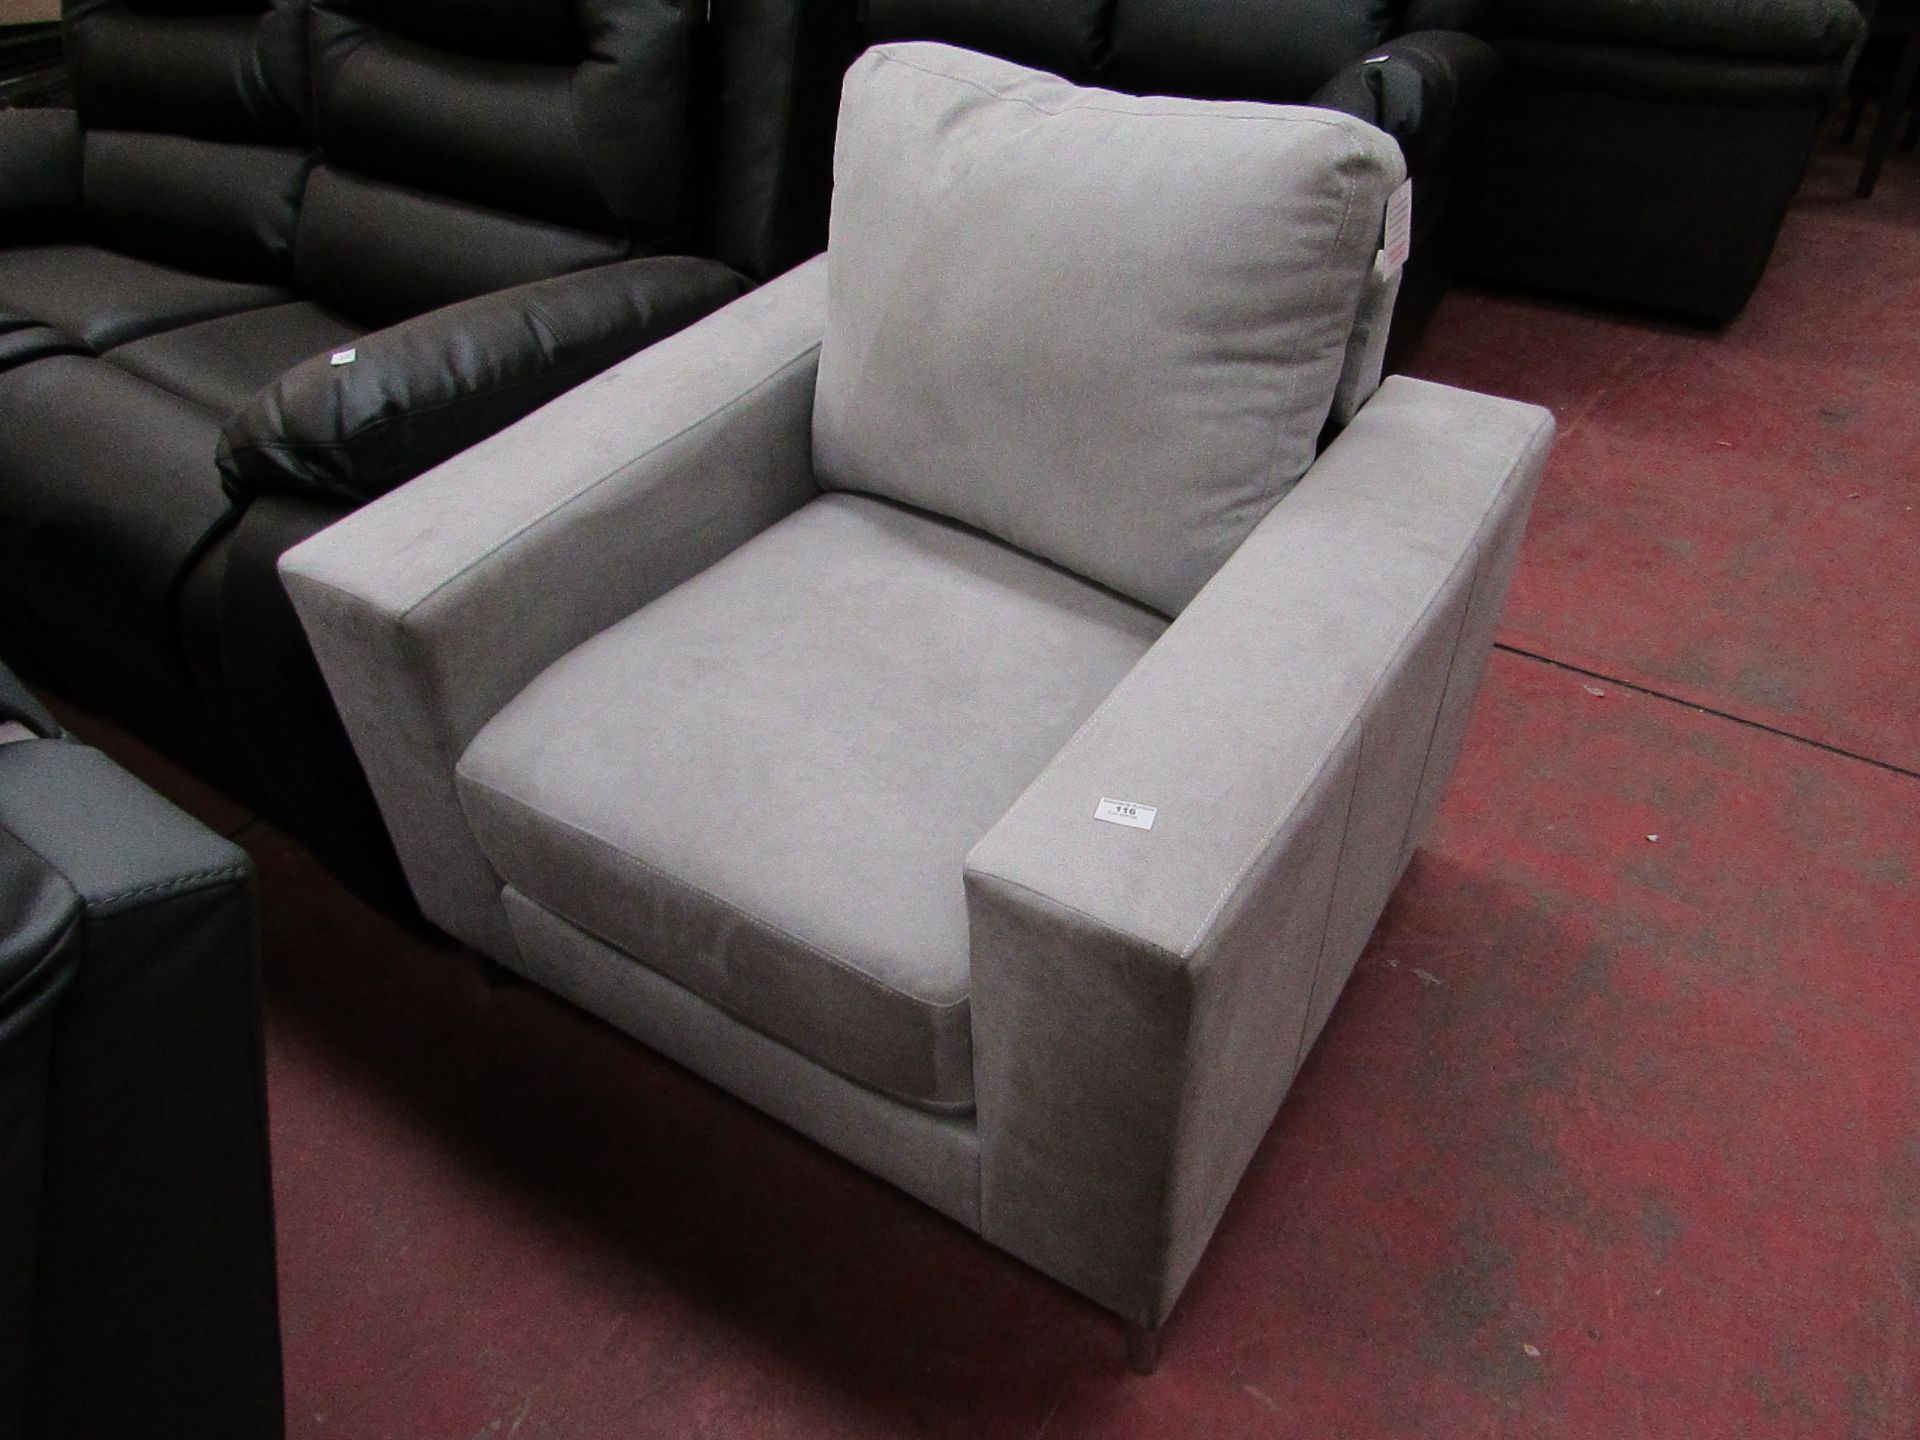 | 1X | FABRIC ARMCHAIR | THIS ITEM IS A RETURN AND MAY HAVE DAMAGE, MARKS, NEED CLEANING, BE MISSING